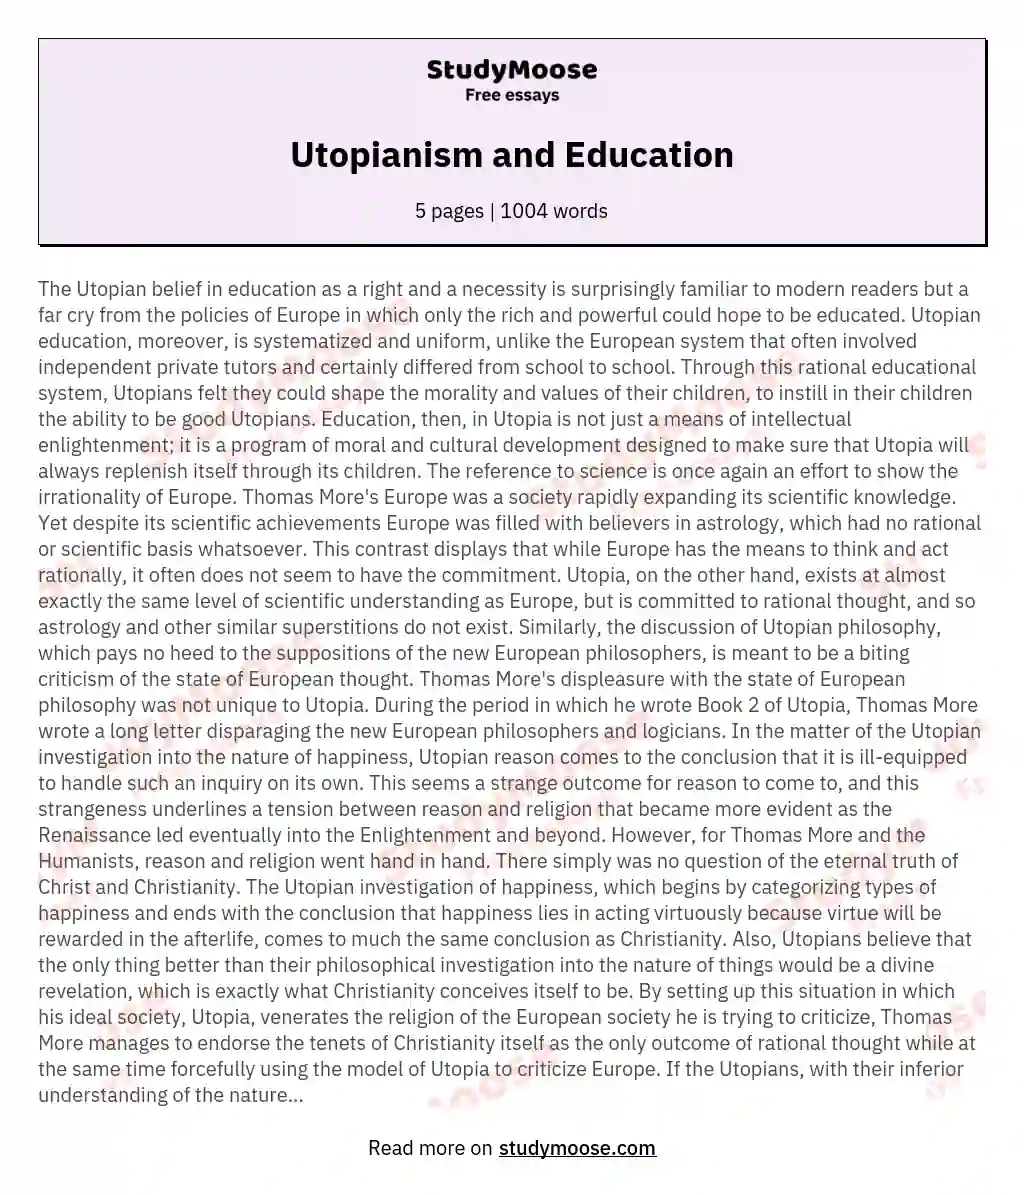 Utopianism and Education essay